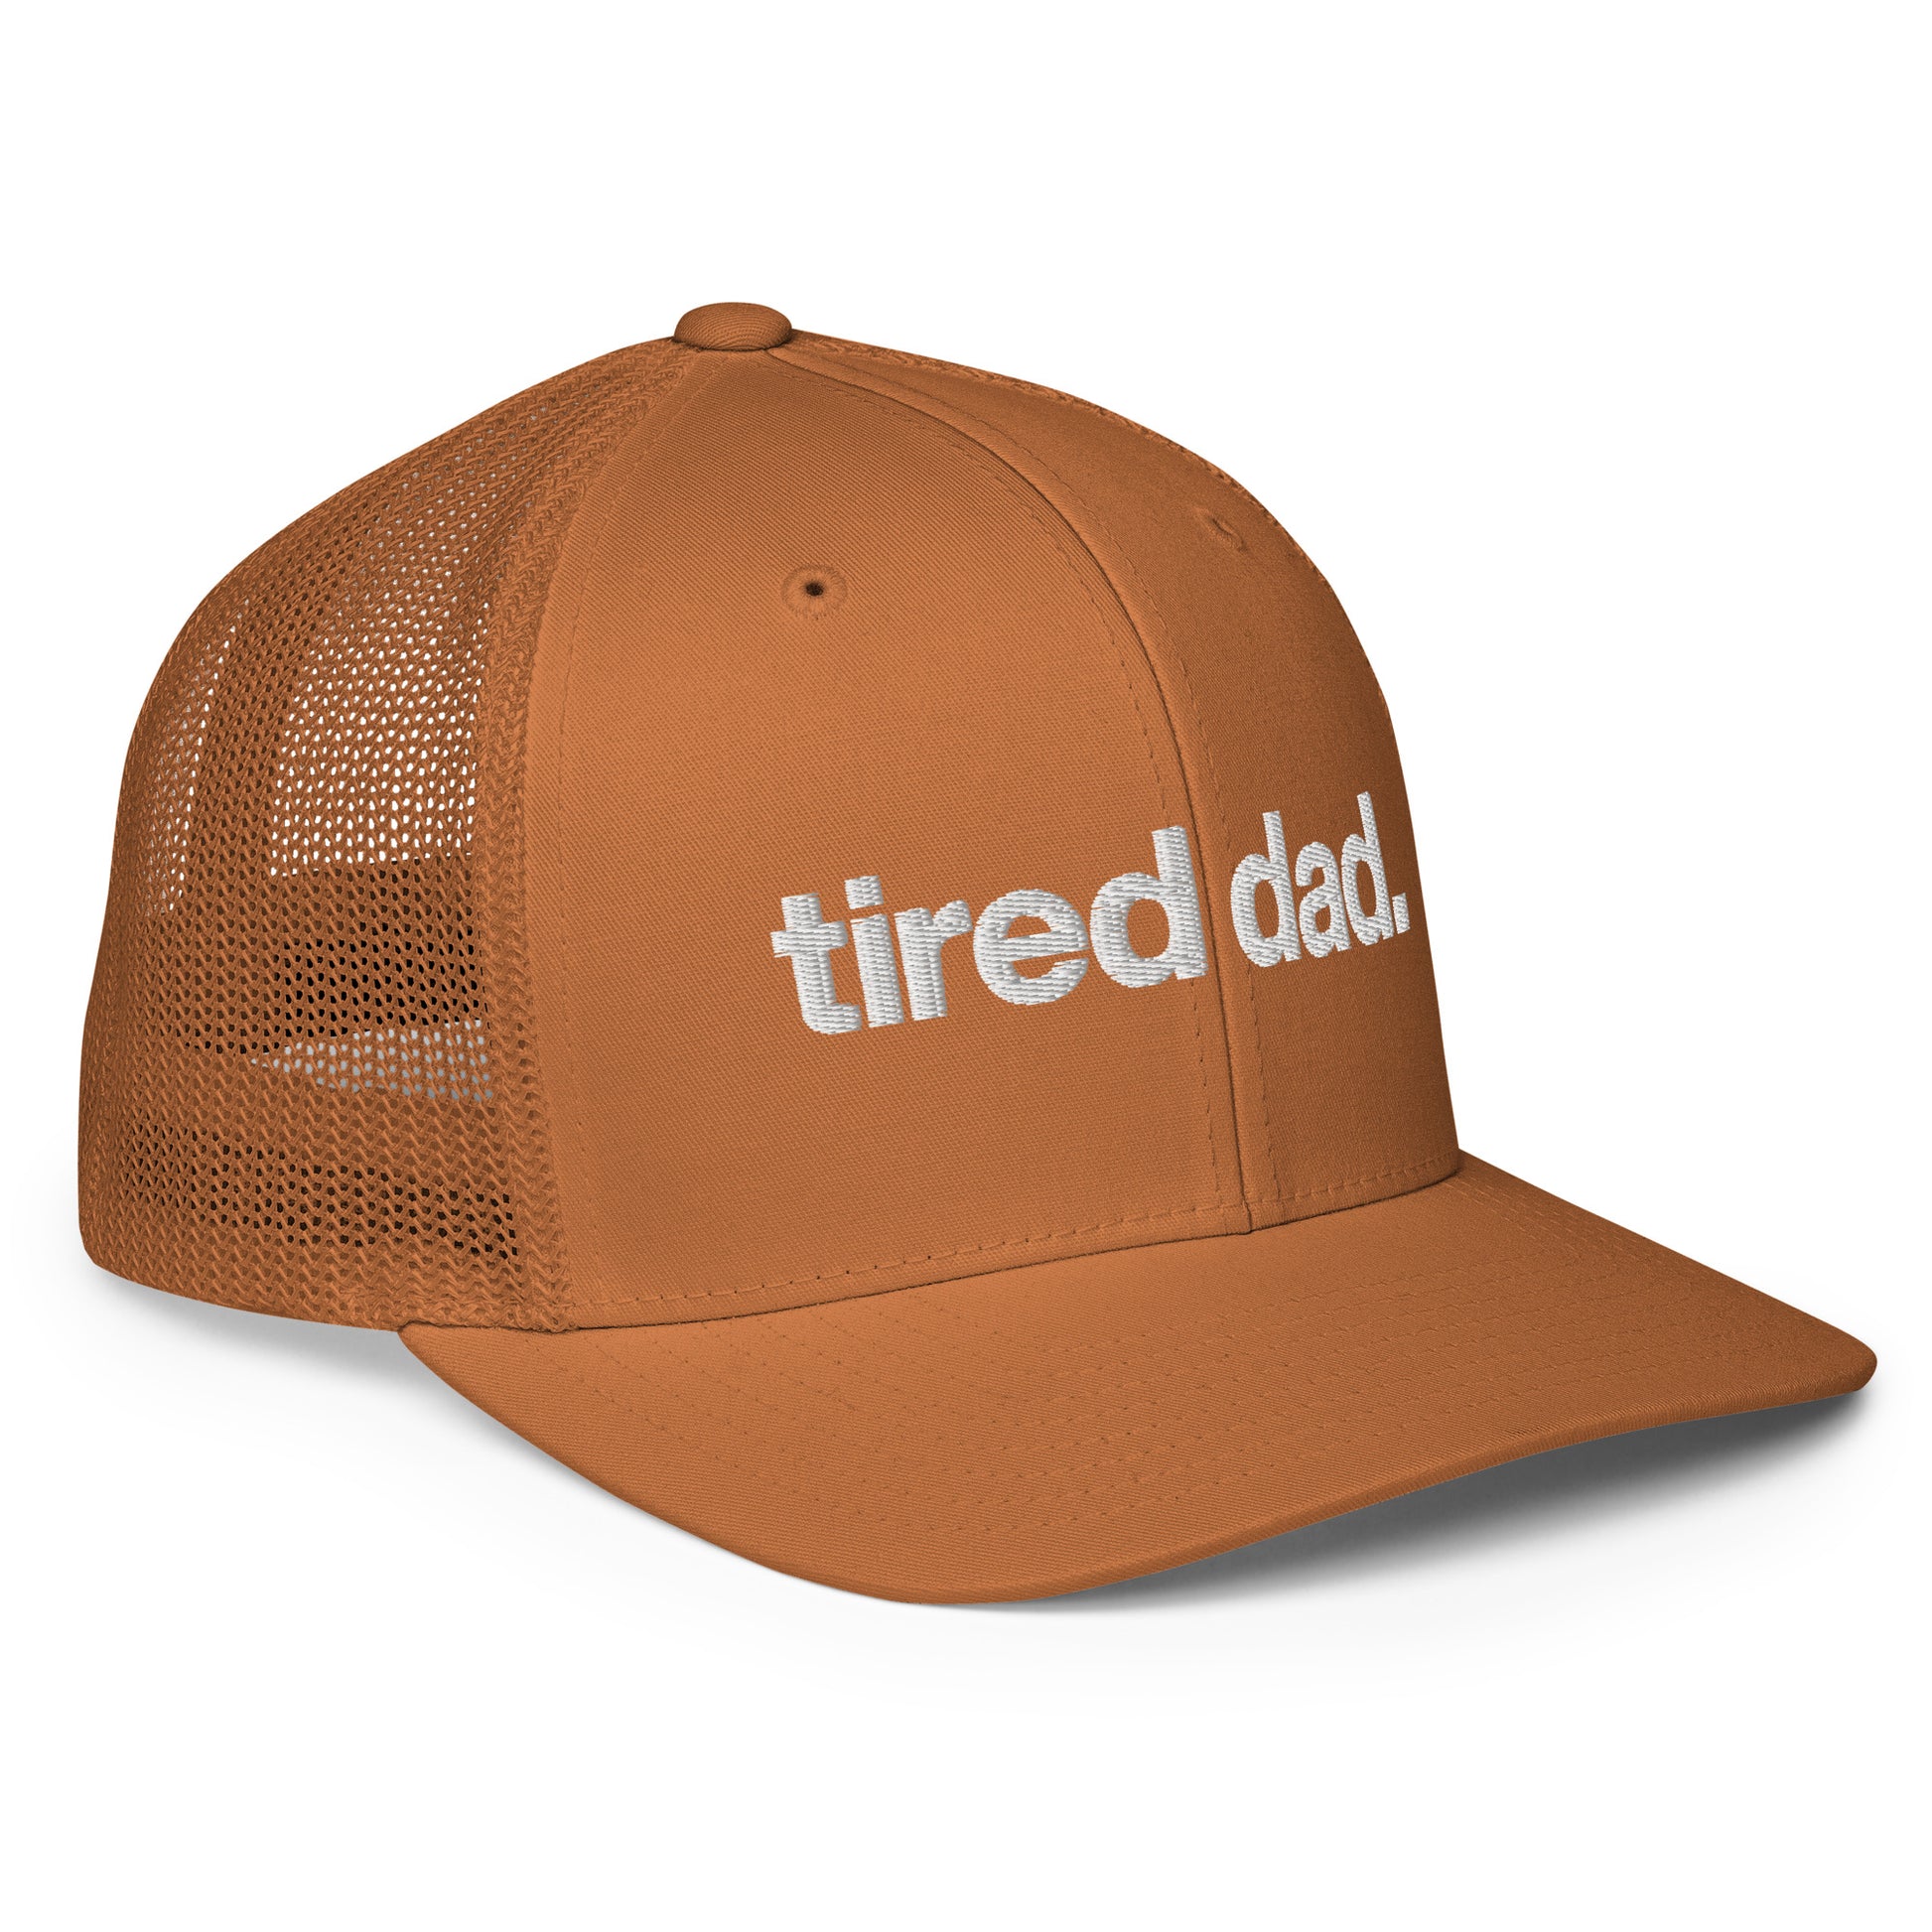 tired dad. flex-fit hat – Tired